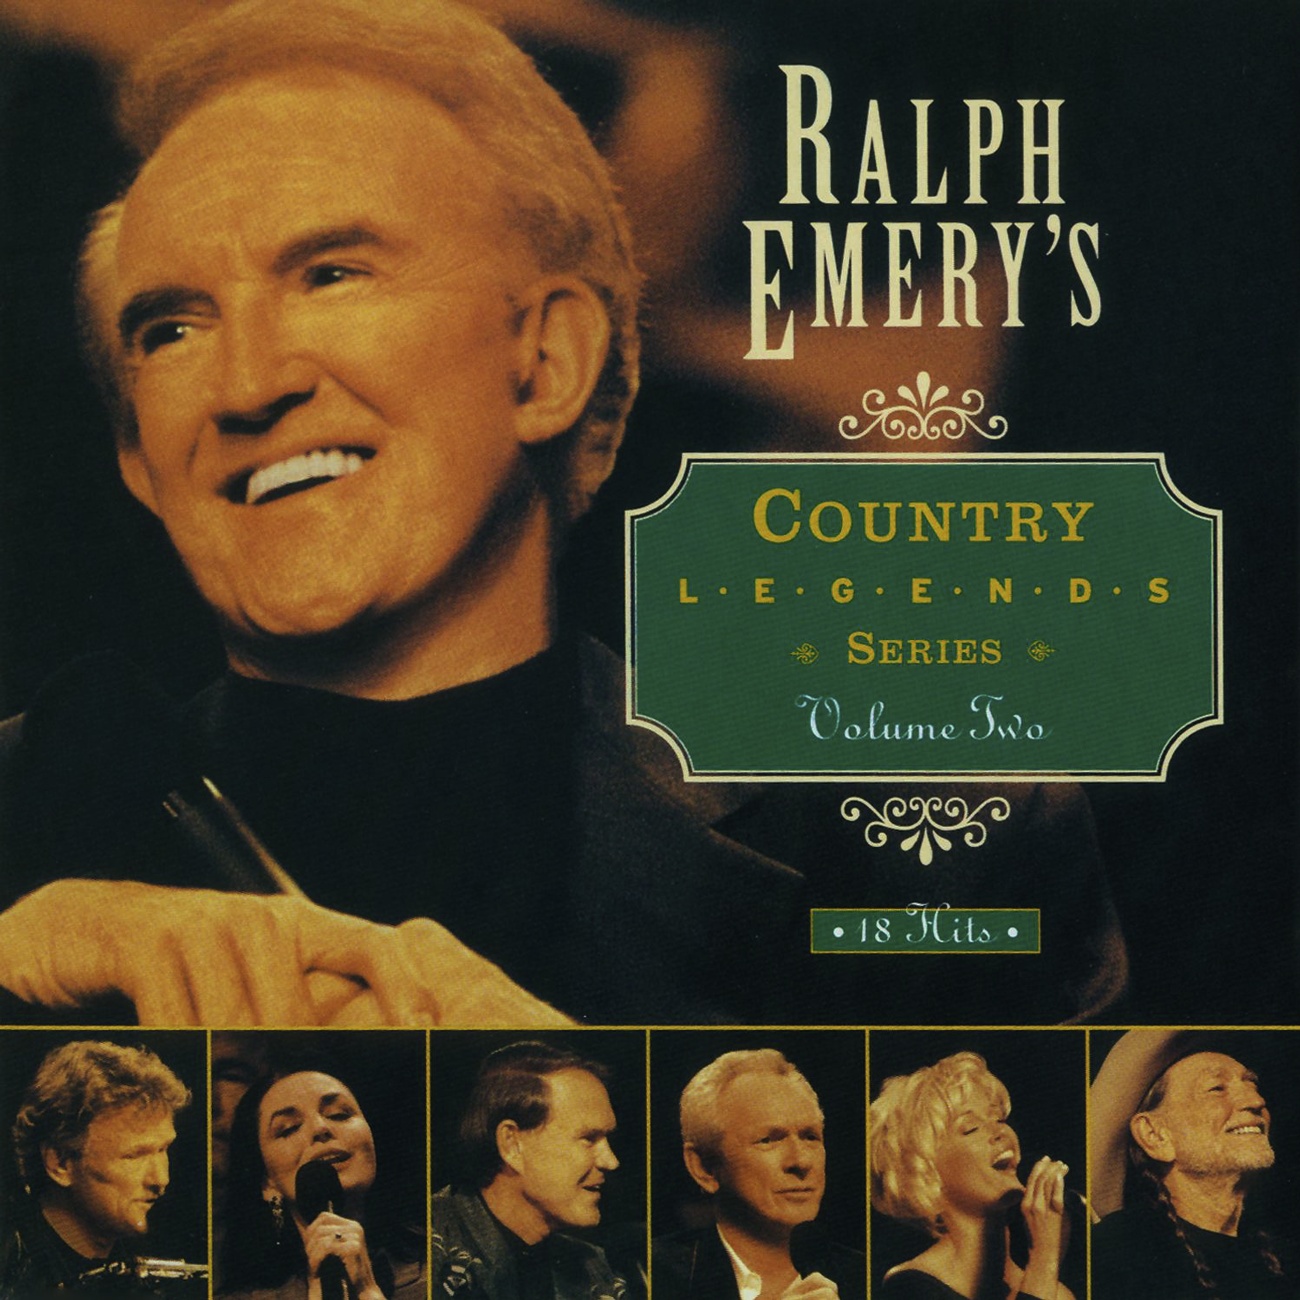 Help Me Make It Through The Night (Ralph Emery's Country Legends Homecoming Vol 2 album version)